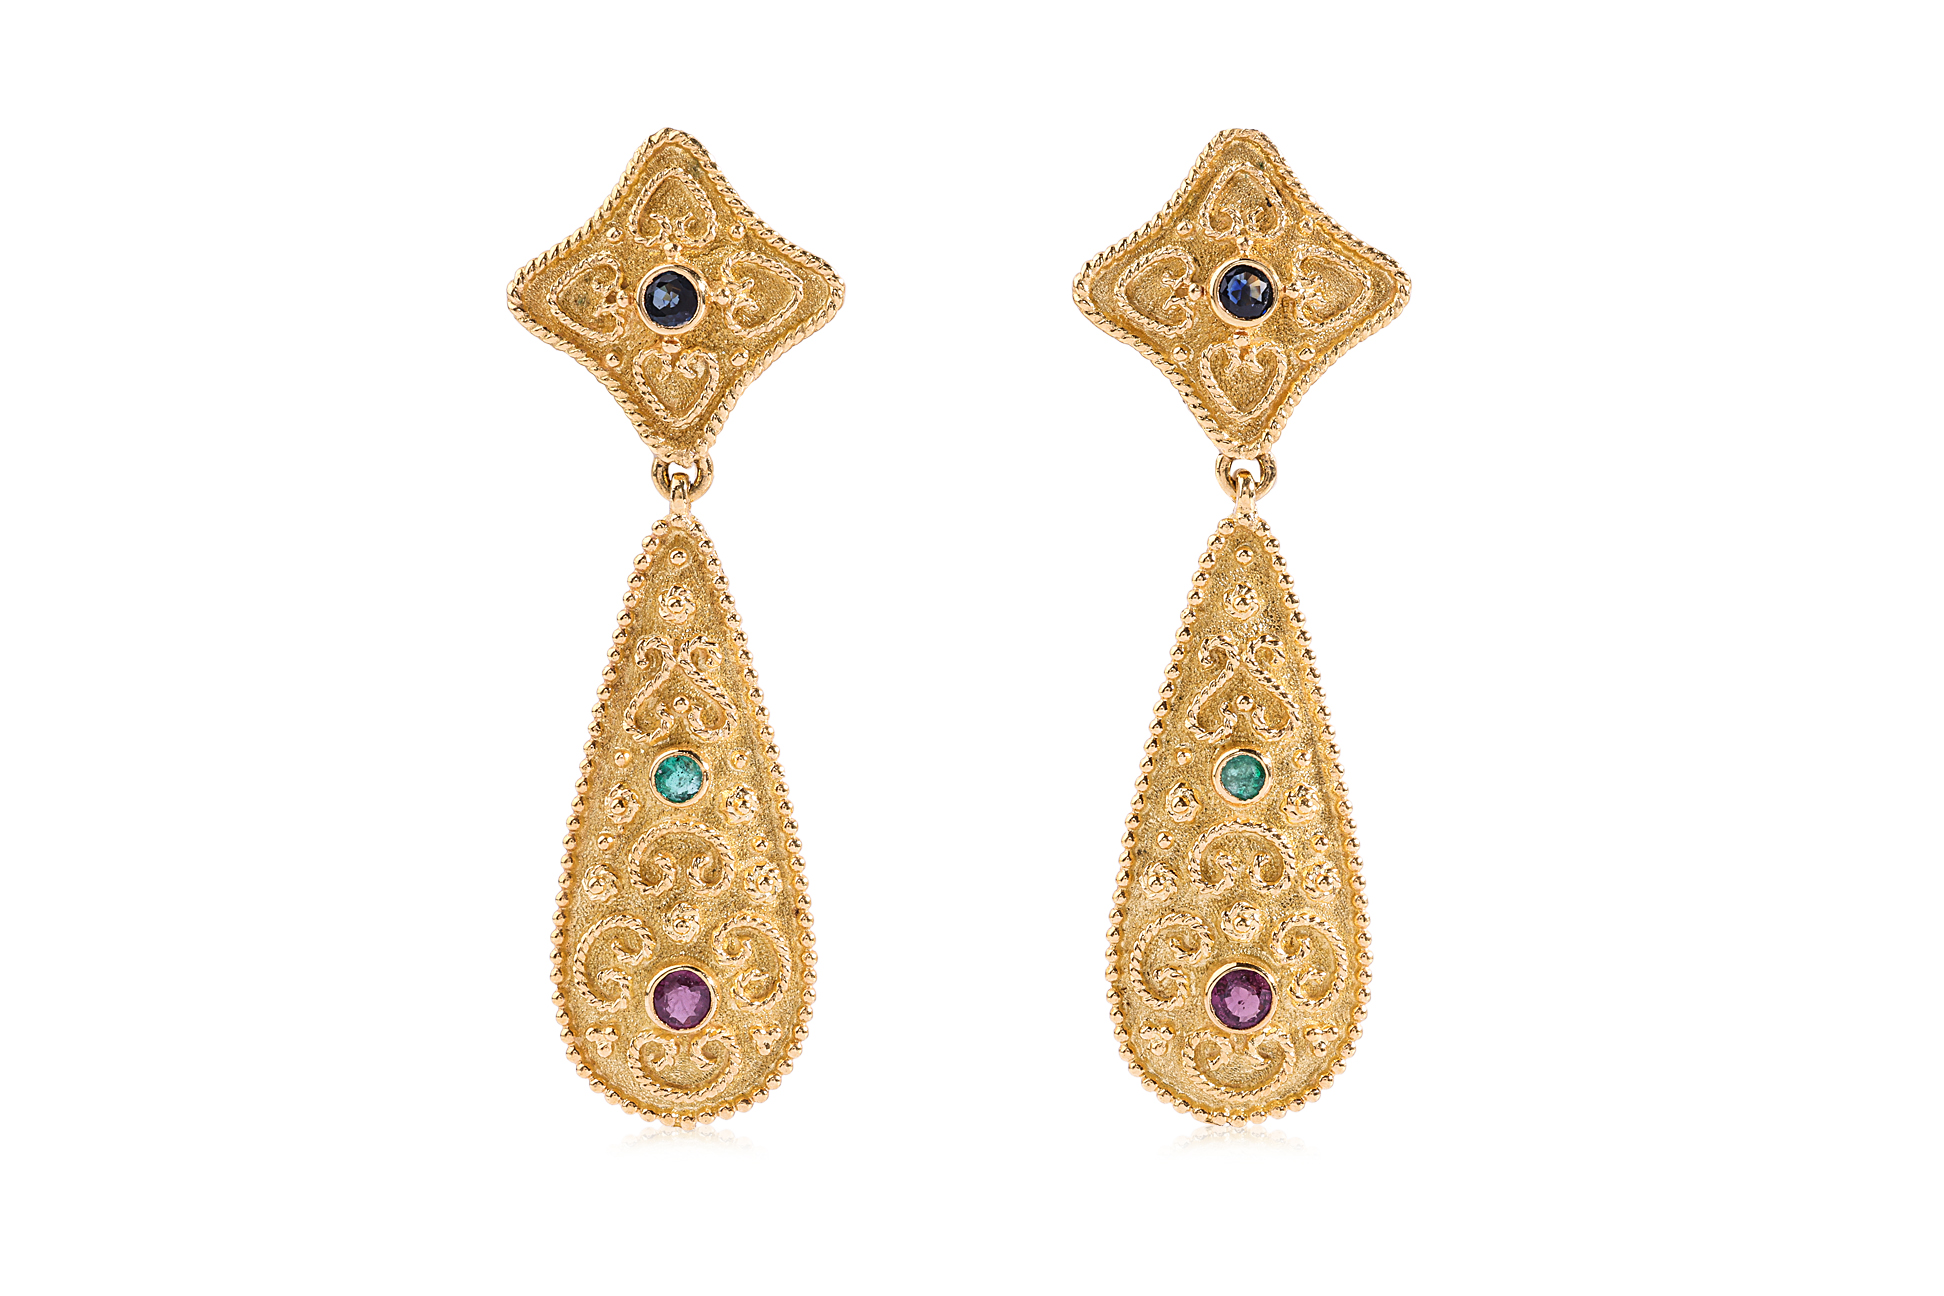 A PAIR OF REVIVAL STYLE MULTI GEM AND GOLD EARRINGS